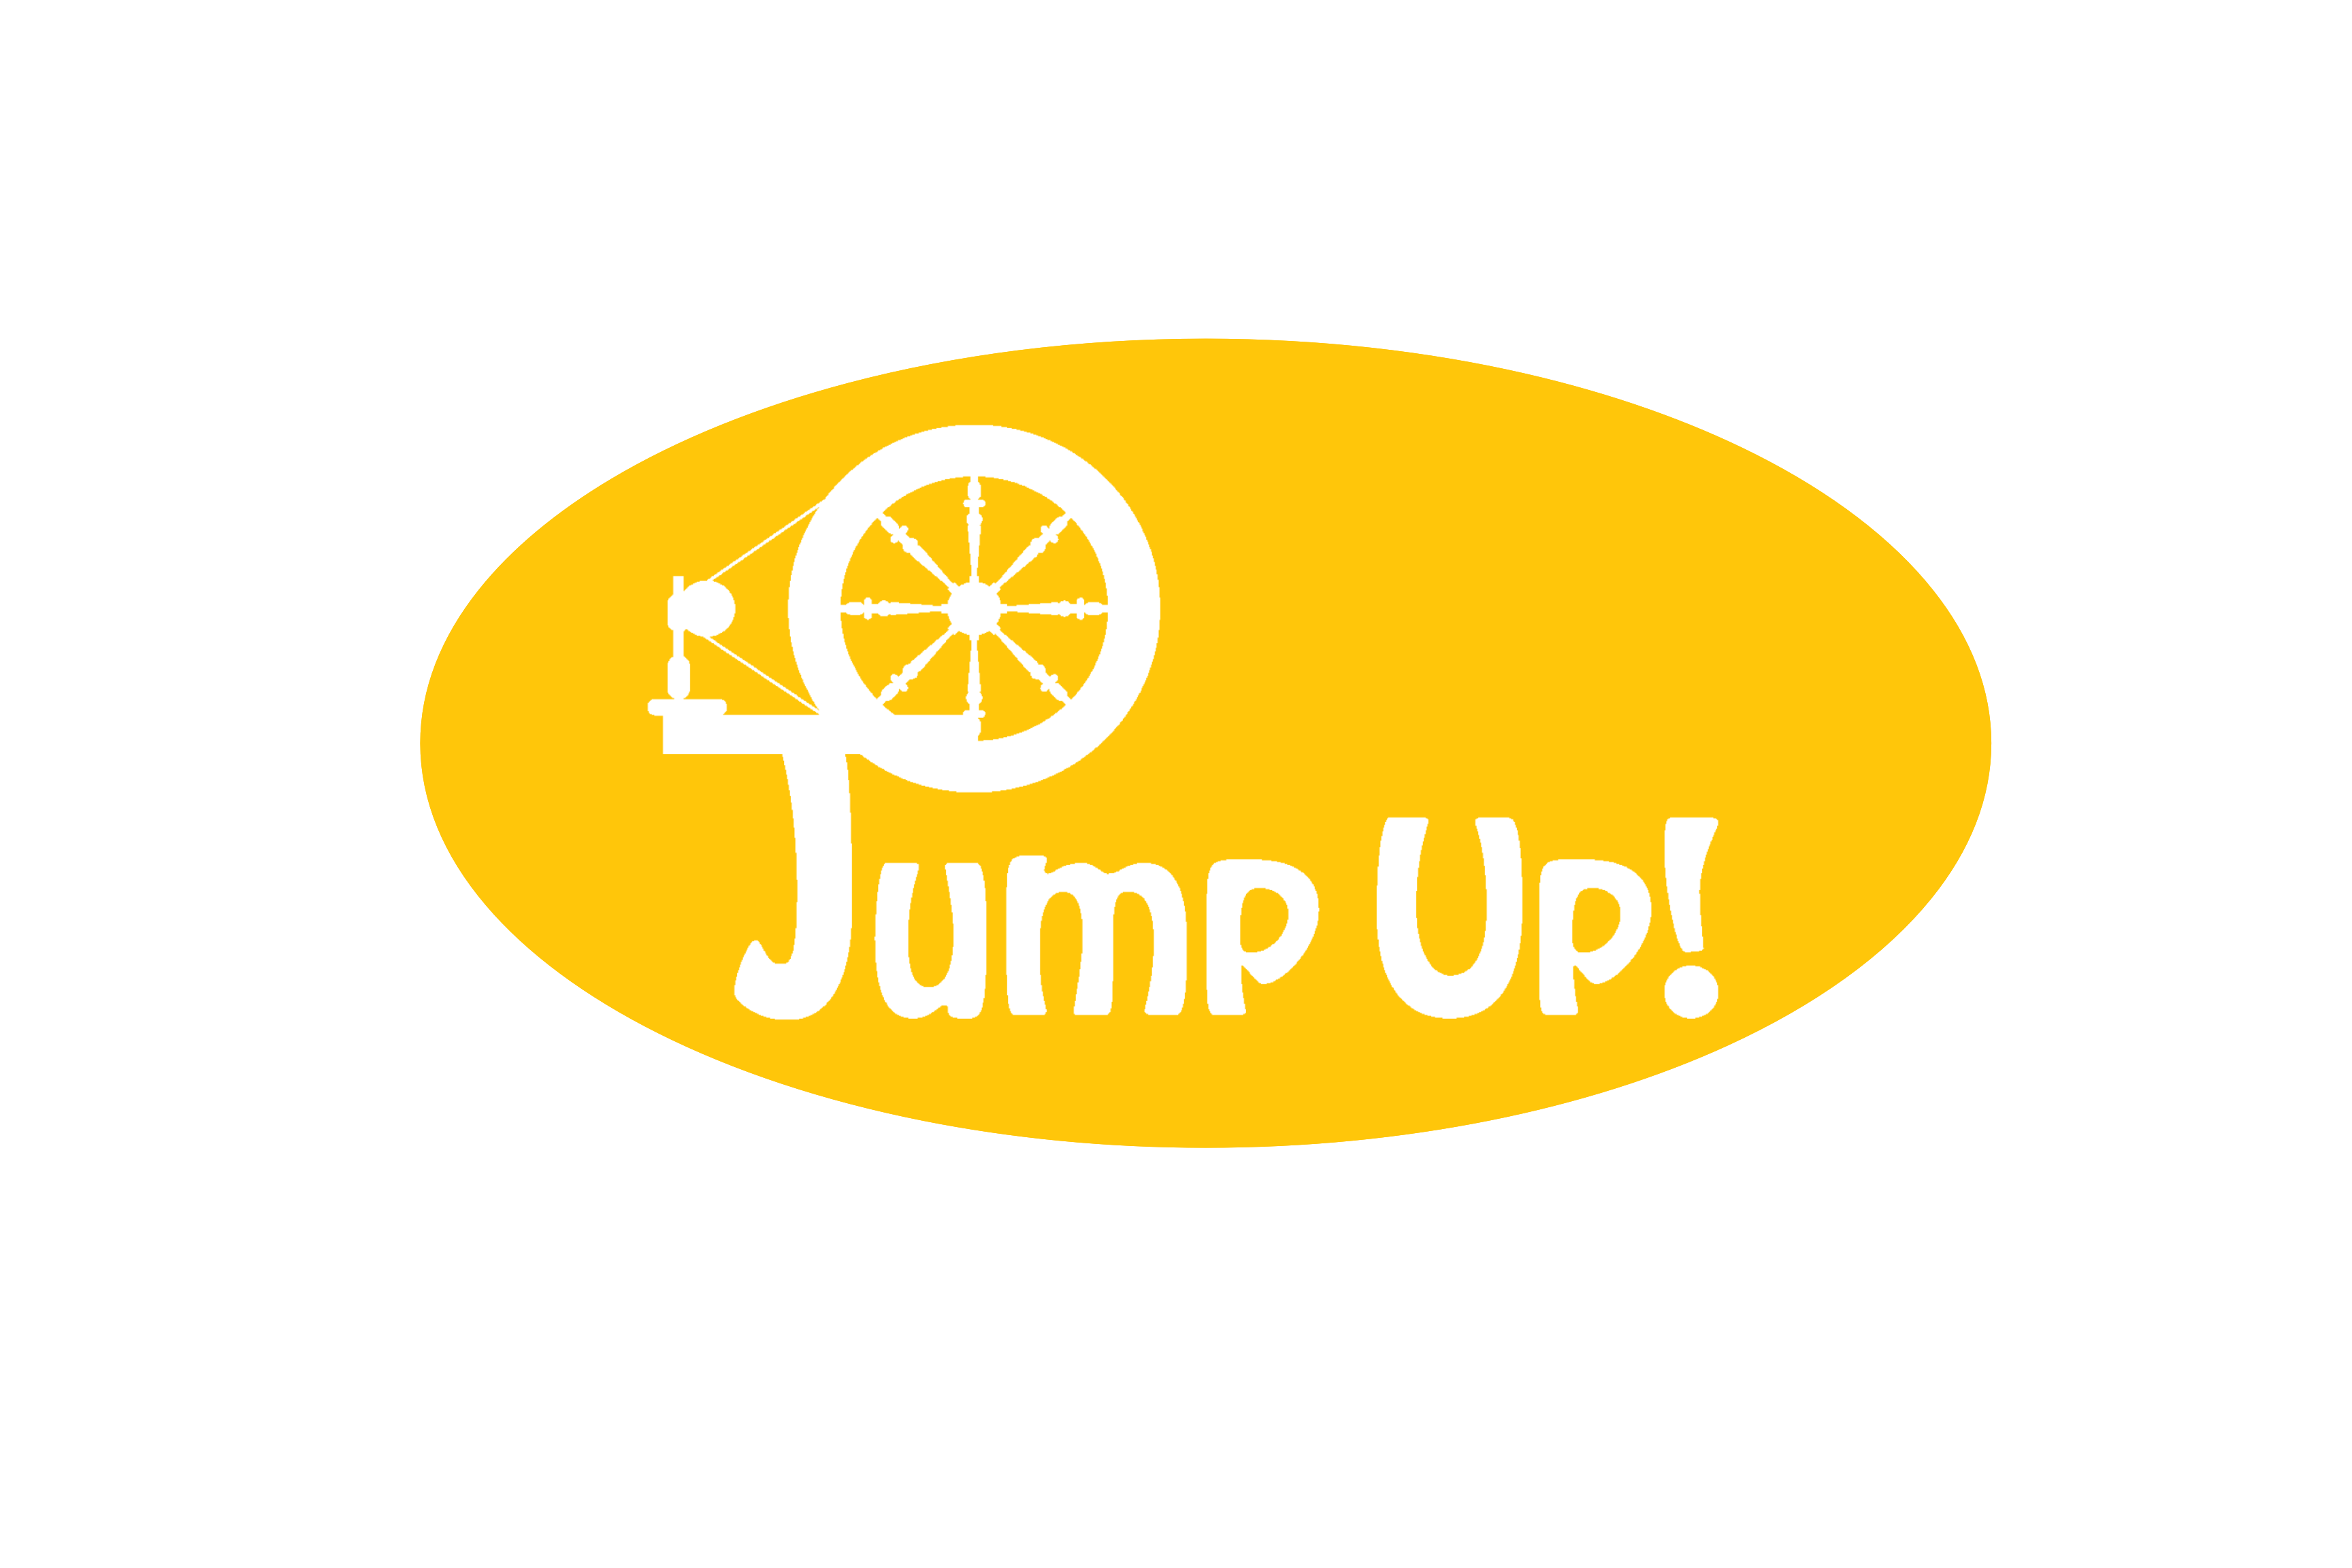 ABOUT JUMP UP!